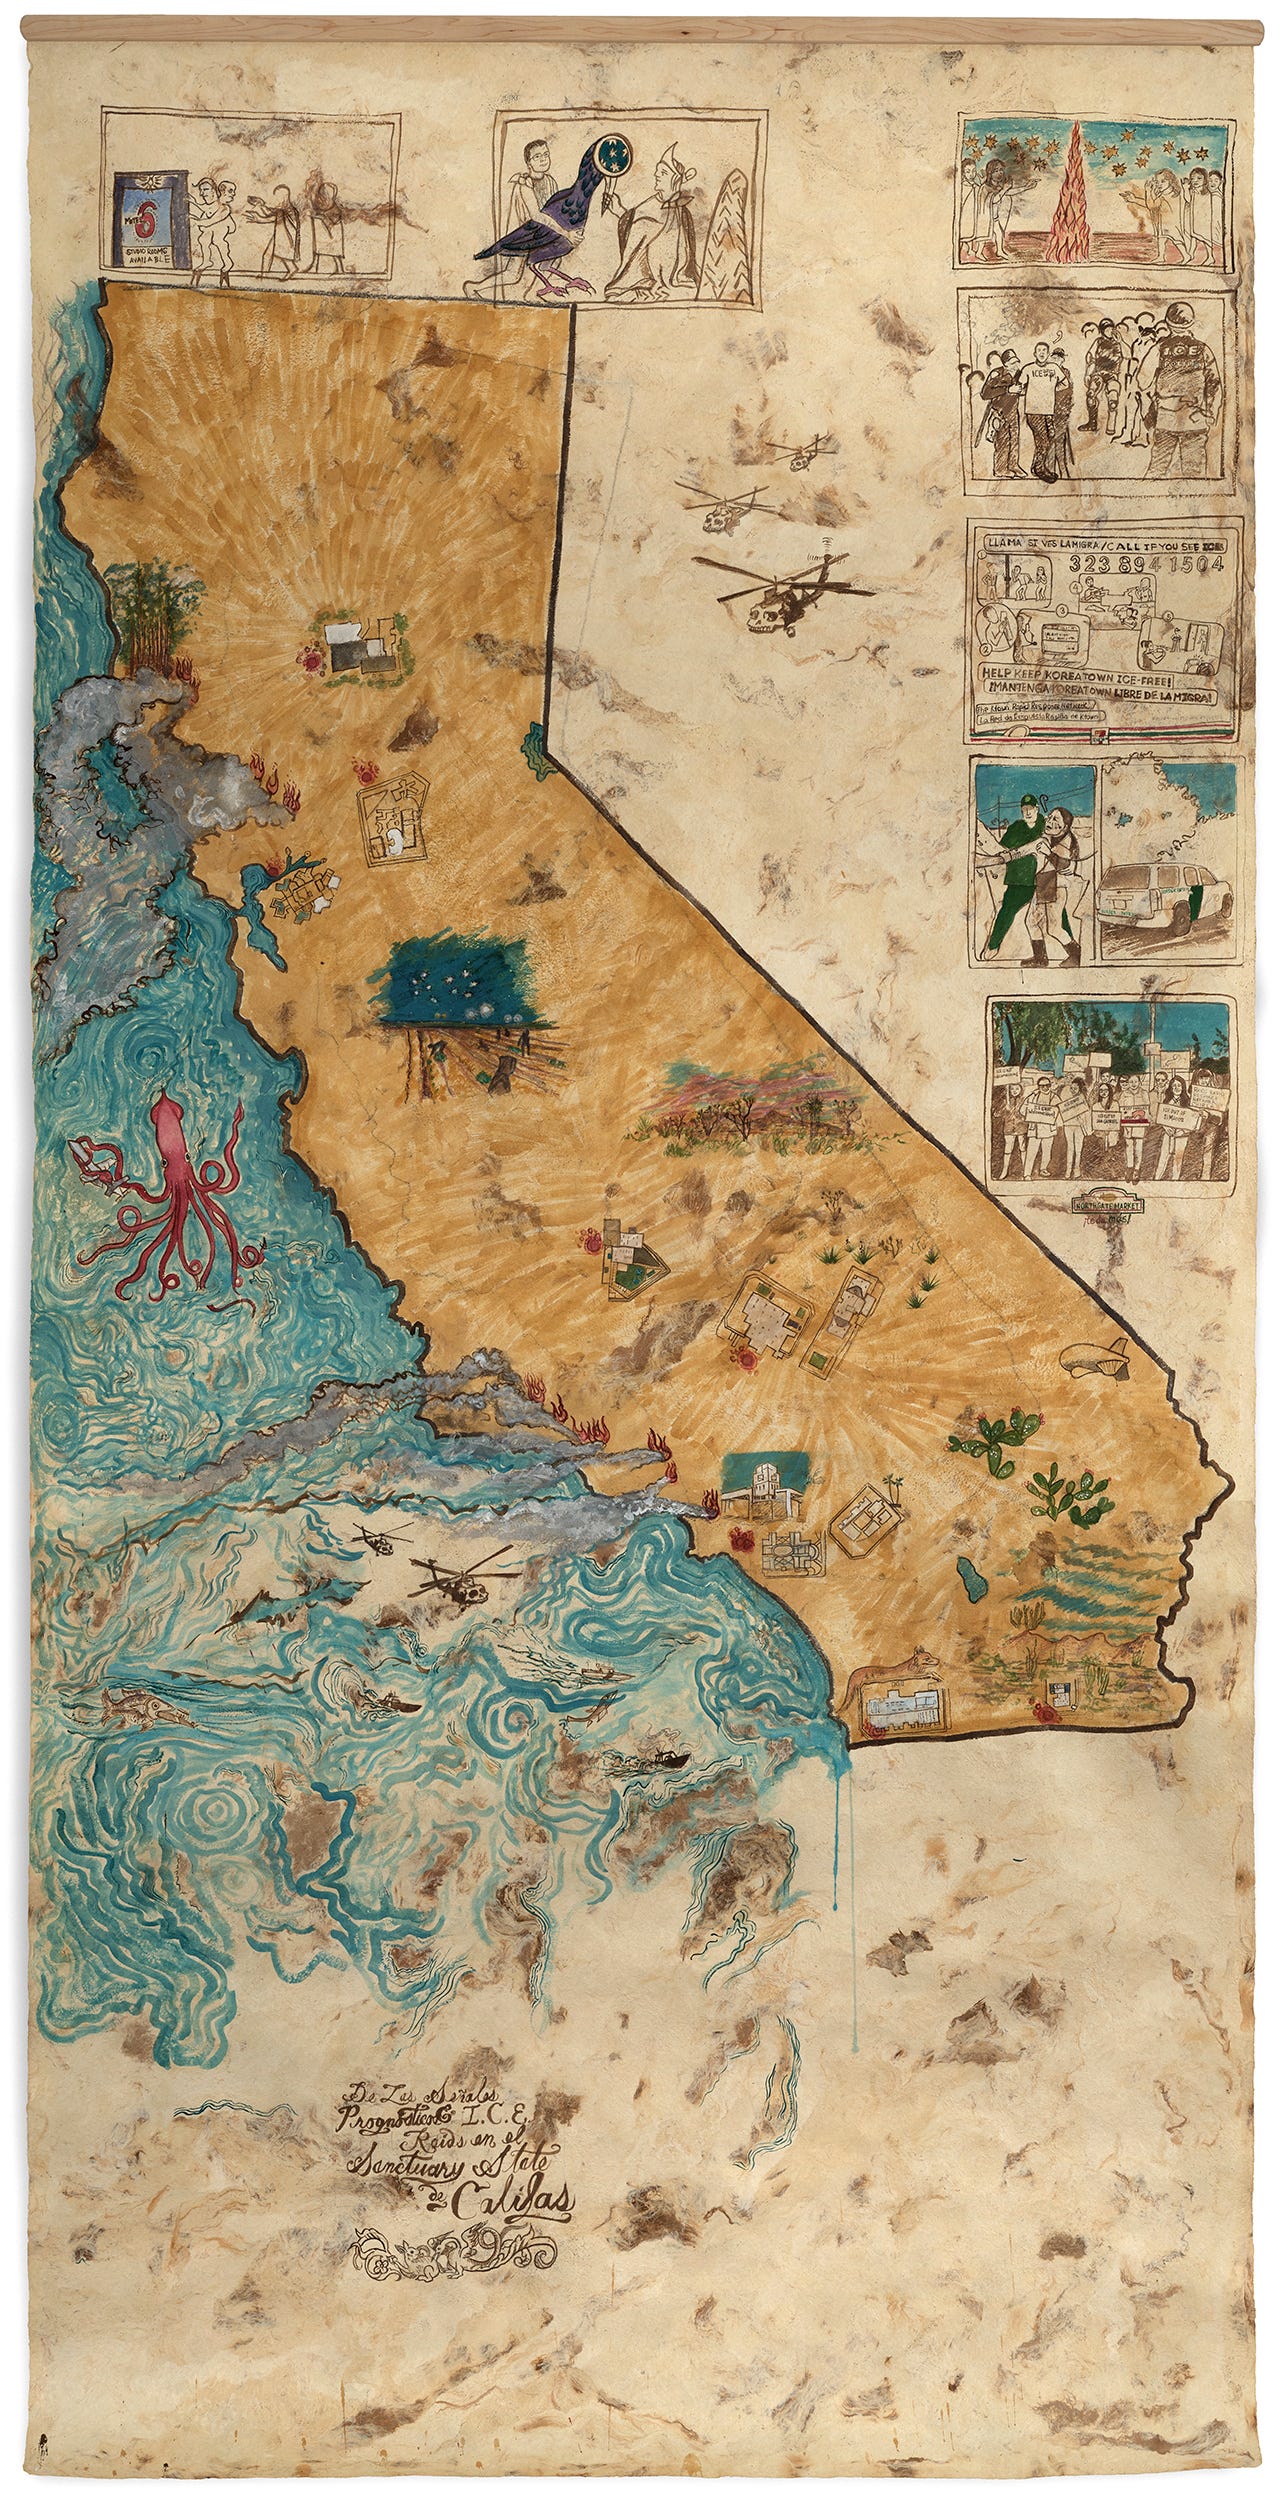 Hand painted map of California